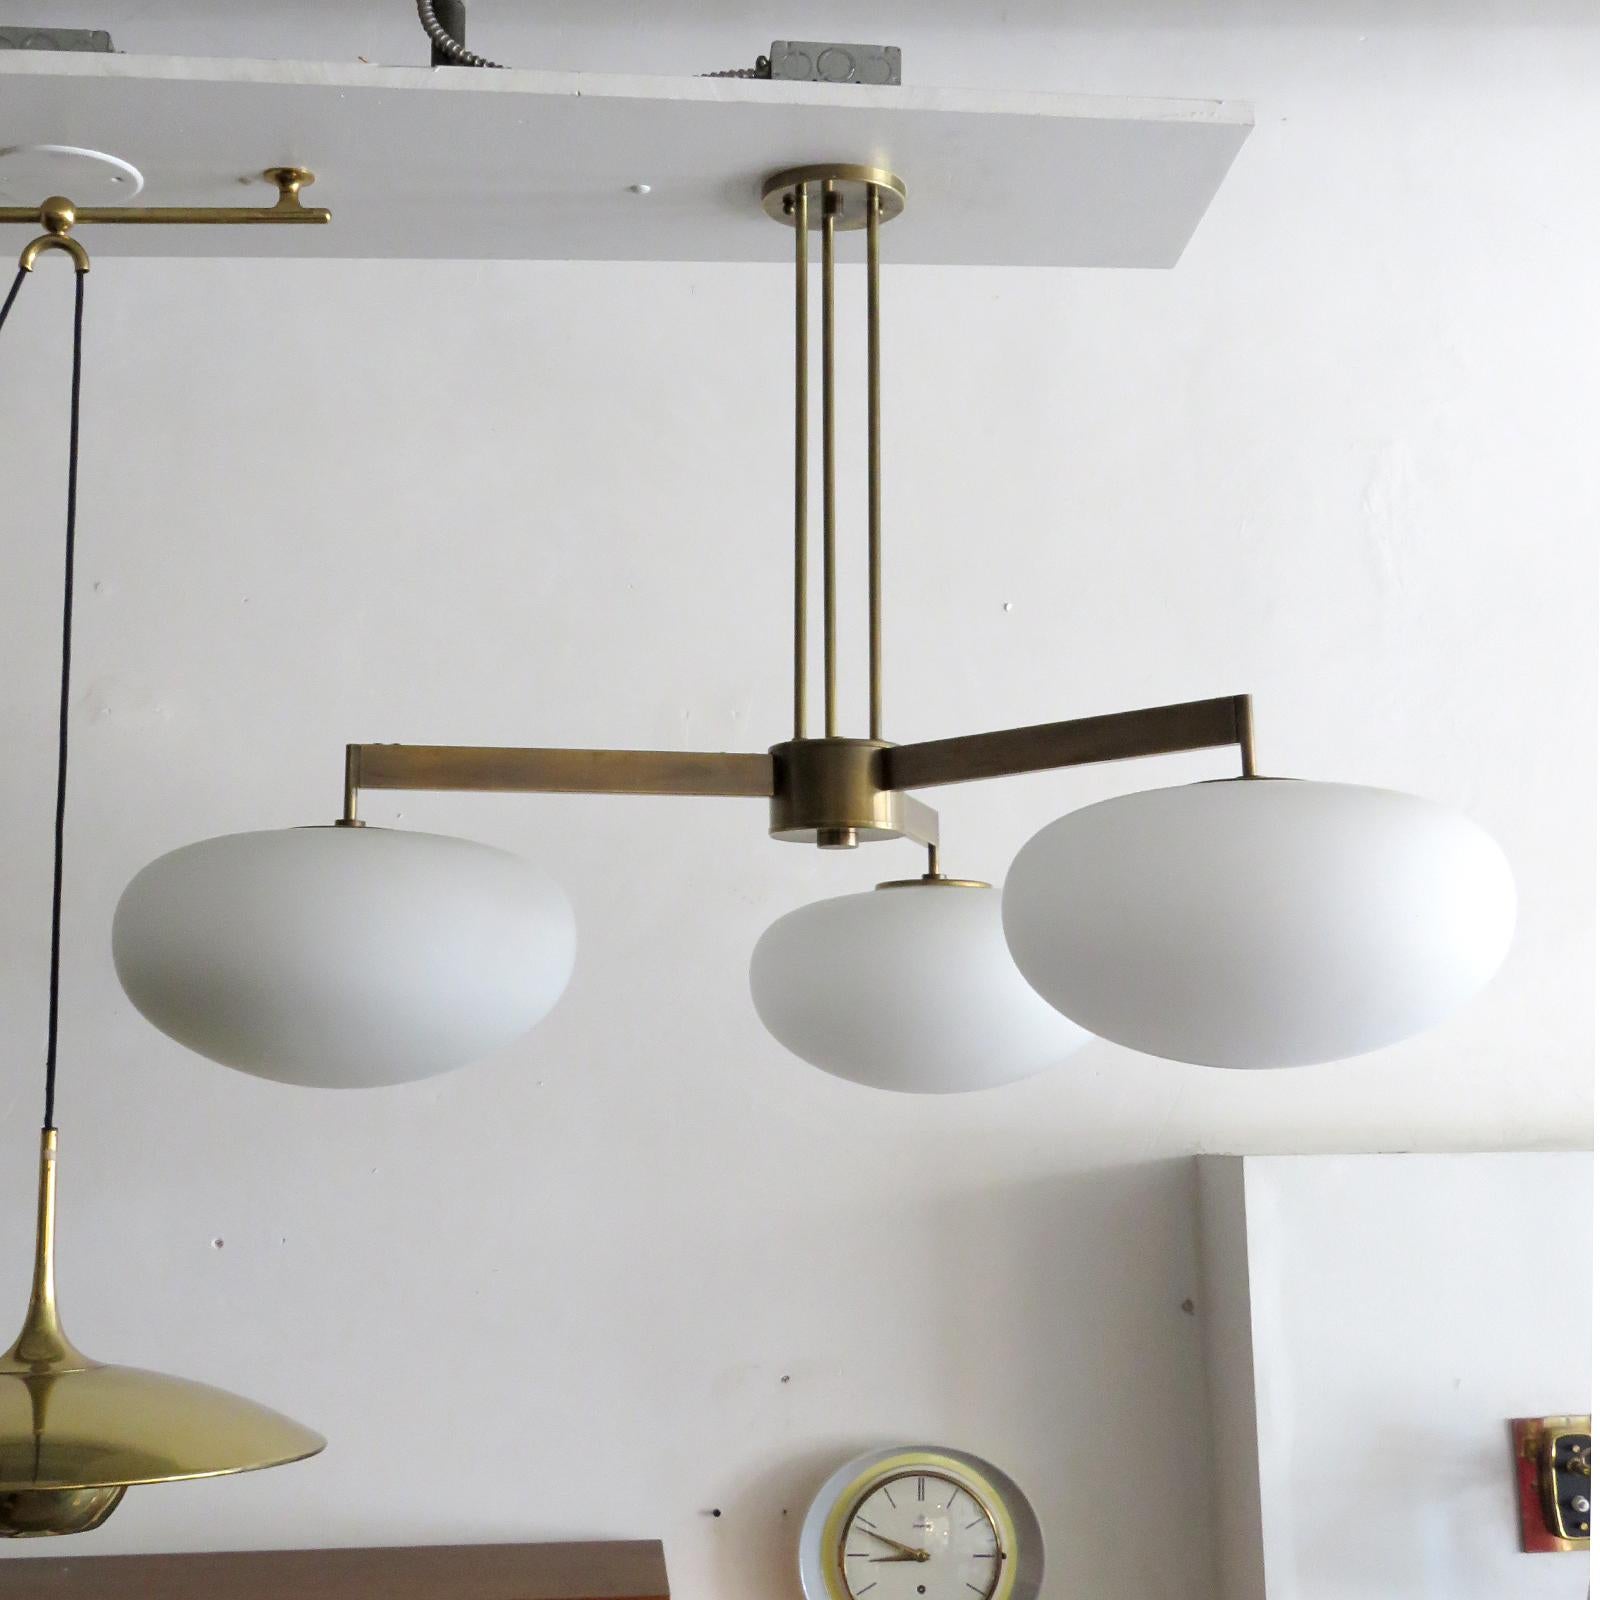 stunning large-scale three-arm flush mount fixture by Gallery L7, handcrafted and finished in Los Angeles from American brass with aged brass finish and three matte opaline glass globes, measures 30 x 40 inch (h x d), height can be customized per